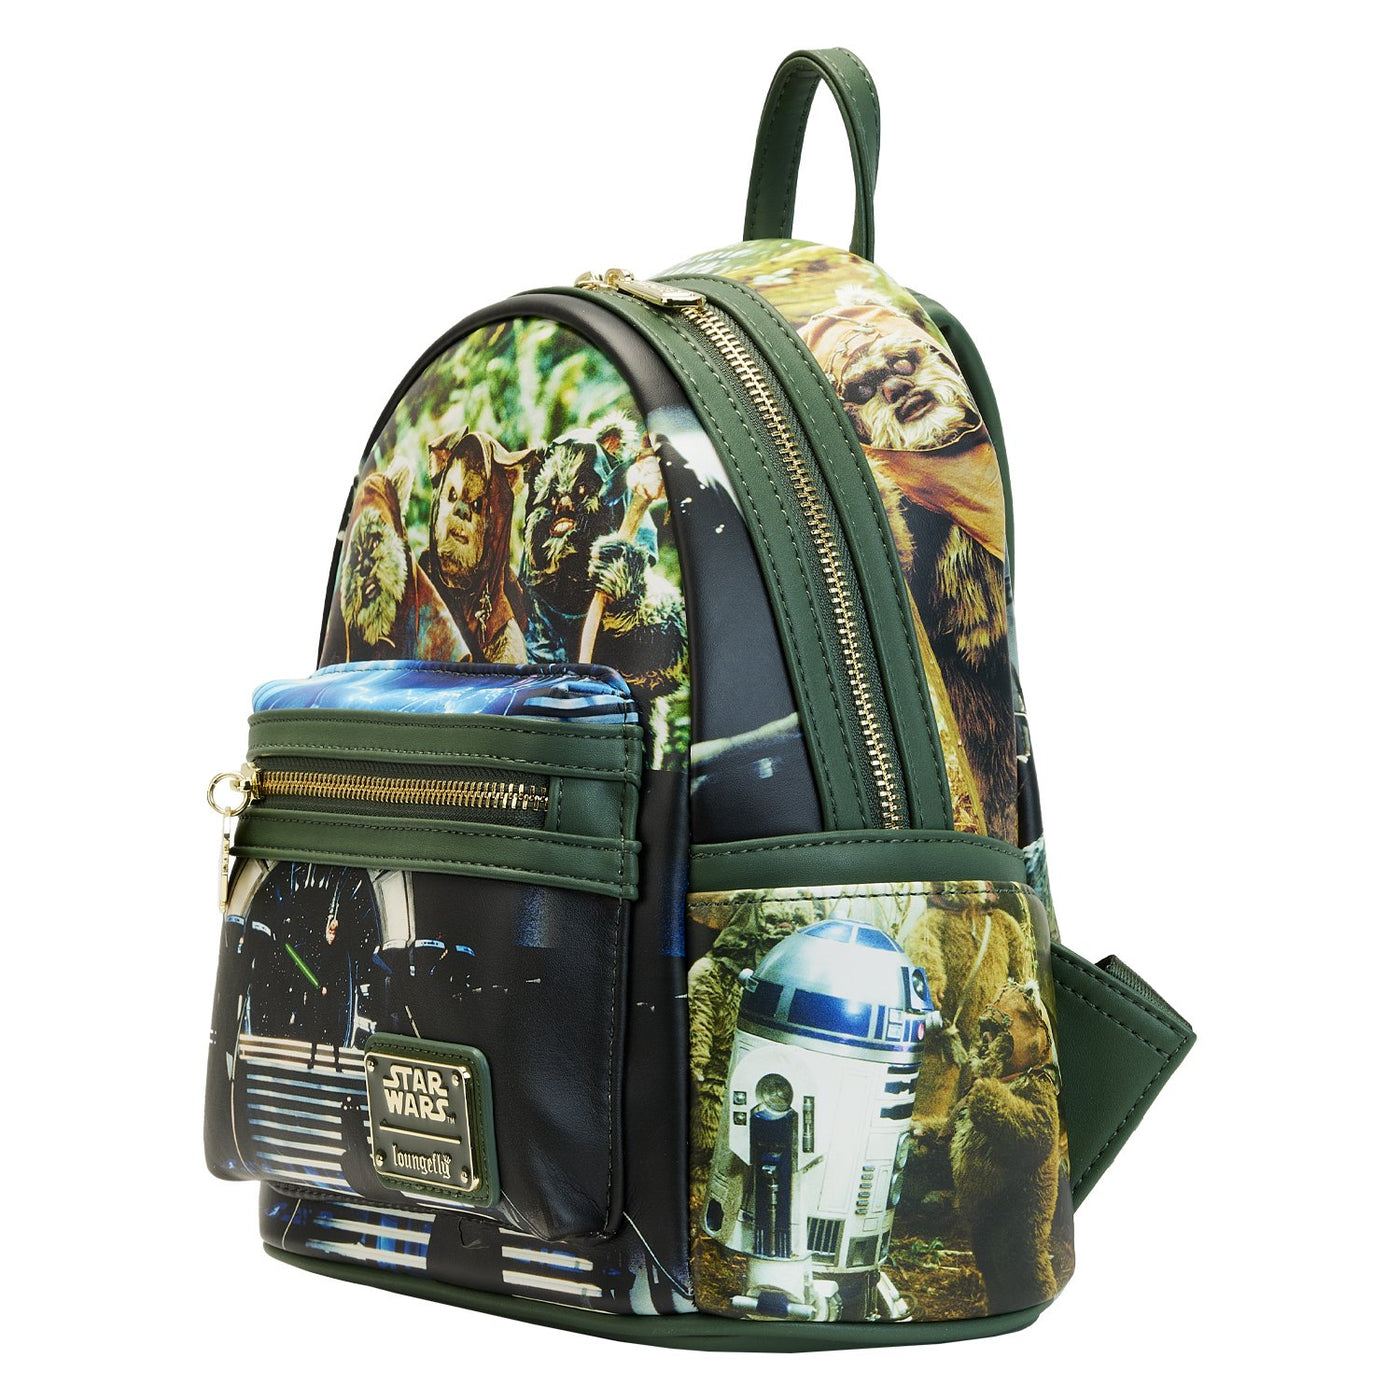 671803455306 - Loungefly Star Wars Scenes Return of the Jedi Mini Backpack - Side View